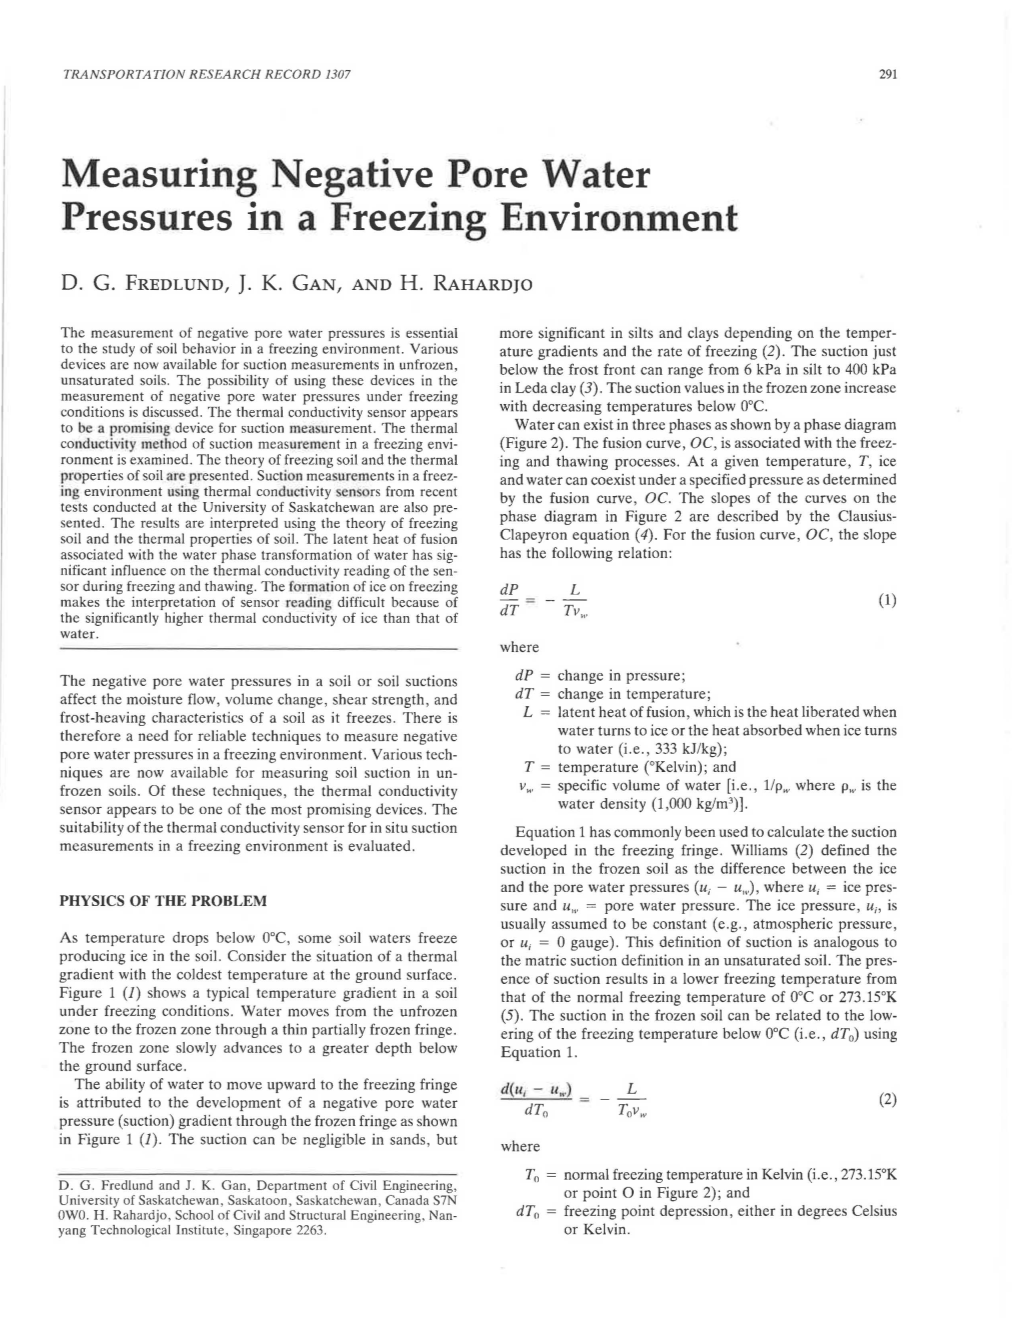 Measuring Negative Pore Water Pressures in a Freezing Environment